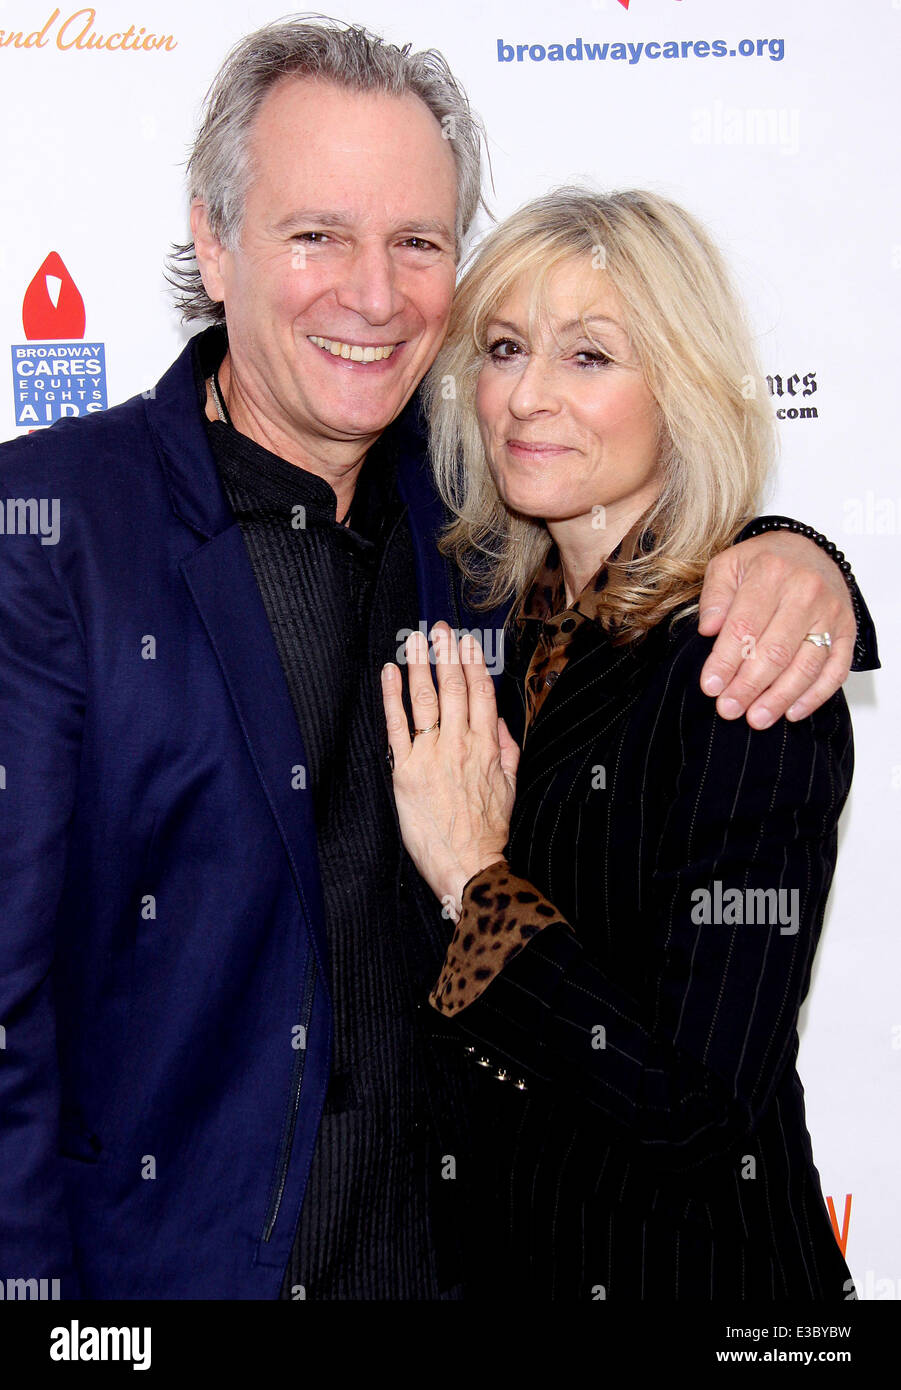 2013 Broadway Cares Flea Market held in Shubert Alley.  Featuring: Robert Desiderio,Judith Light Where: New York, NY, United States When: 22 Sep 2013 Stock Photo